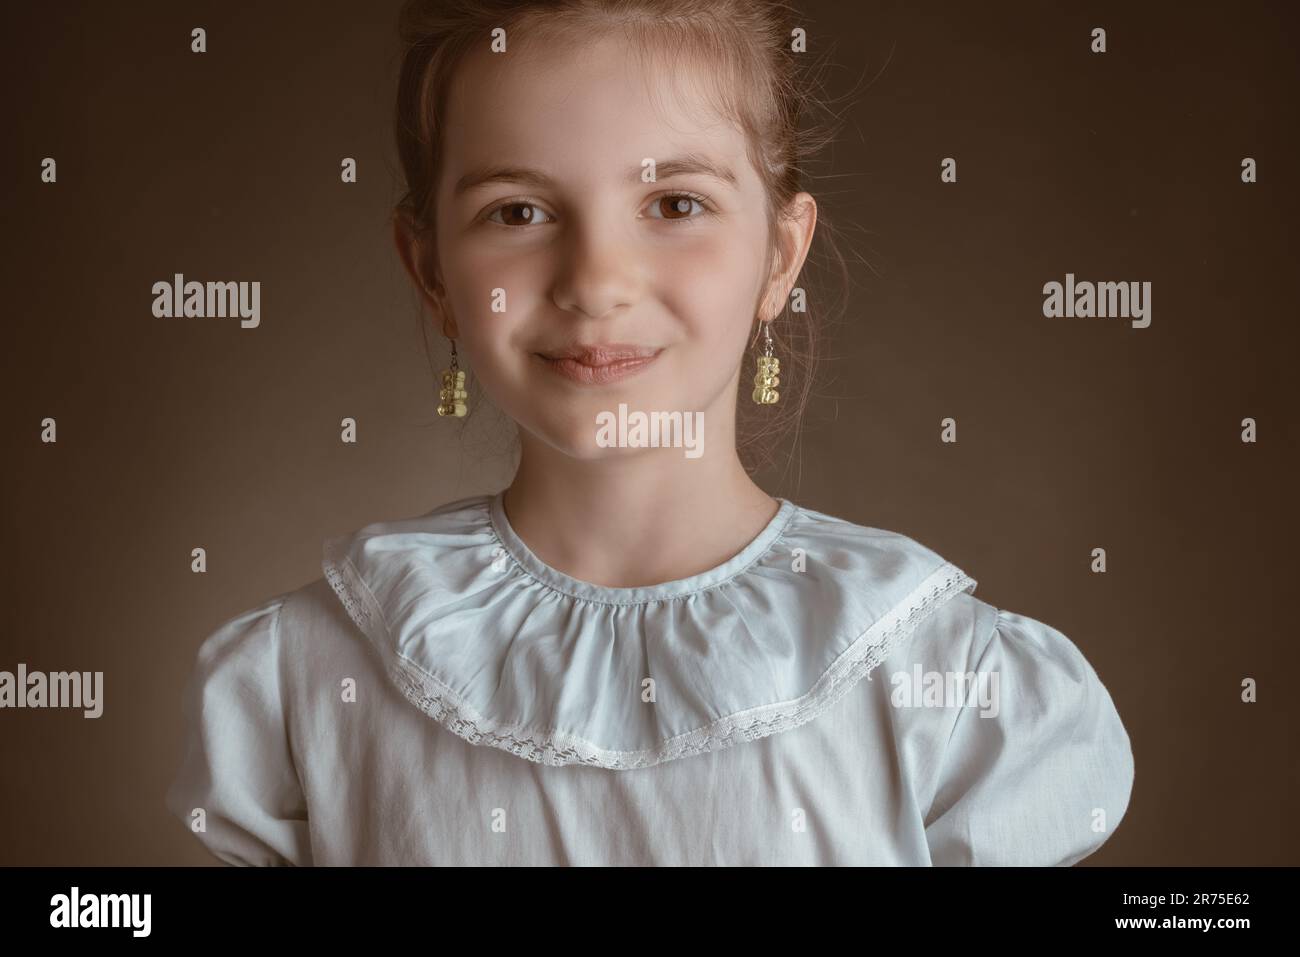 Beautiful clever, little girl, studio portrait on brown background Stock Photo